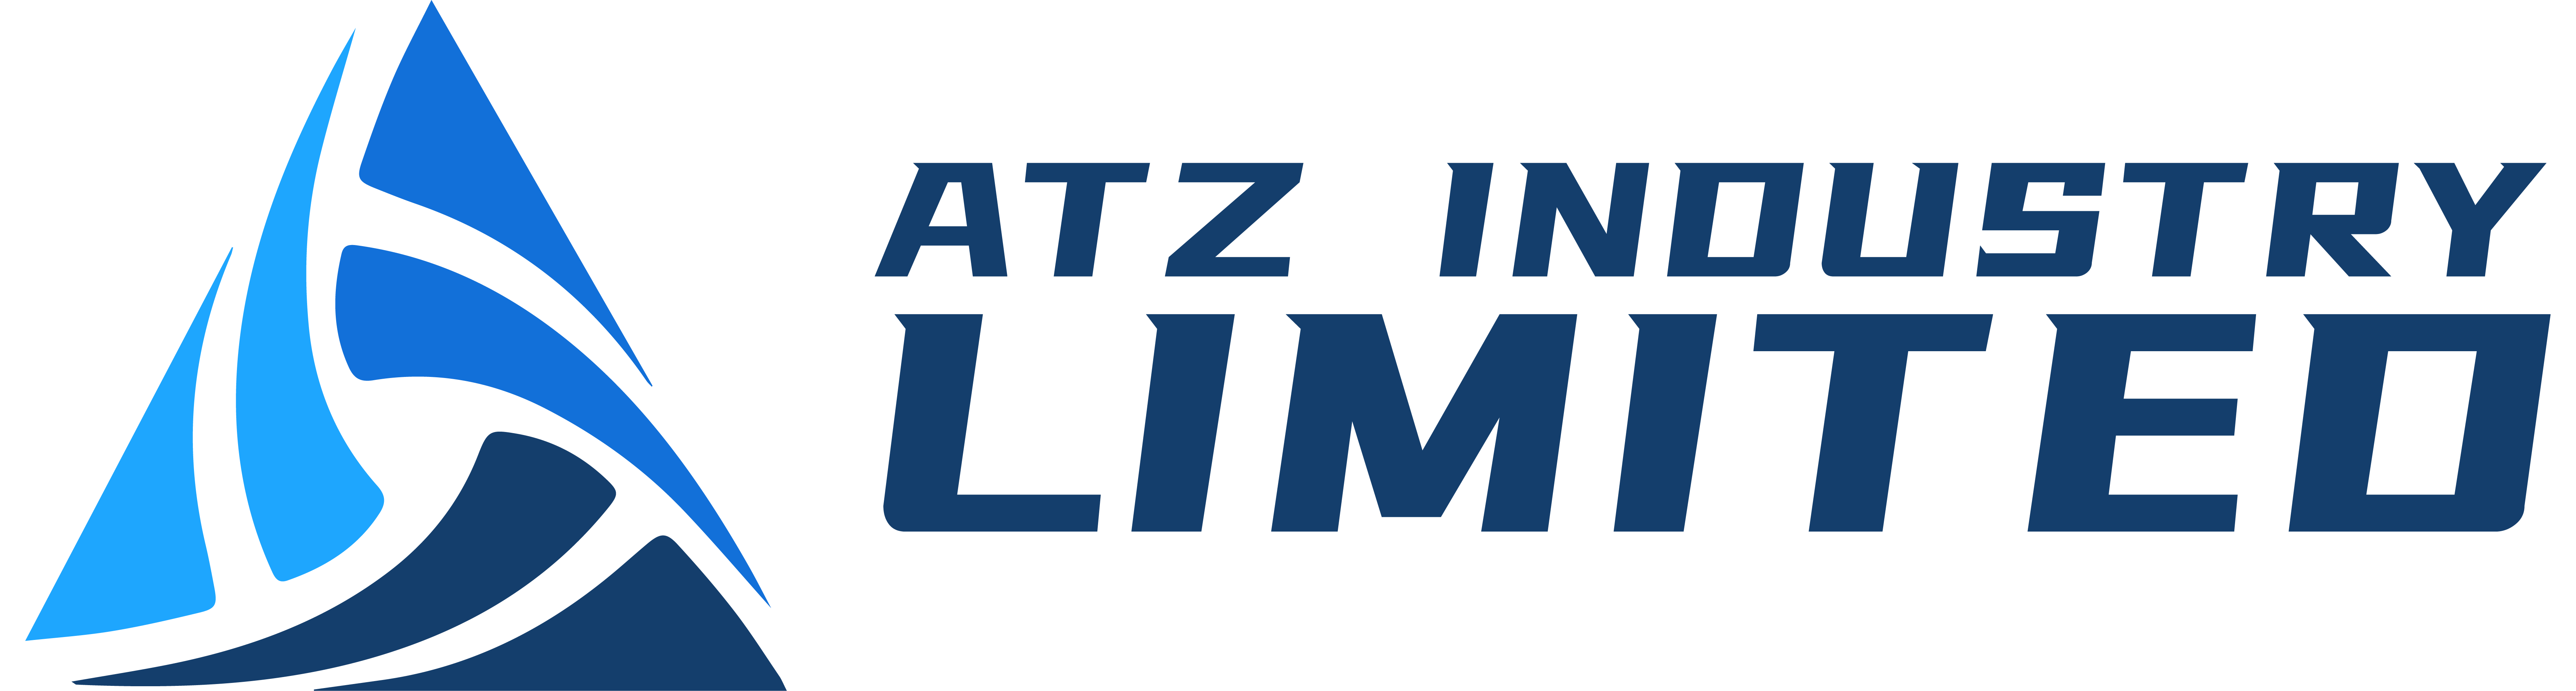 ATZ Industry Limited